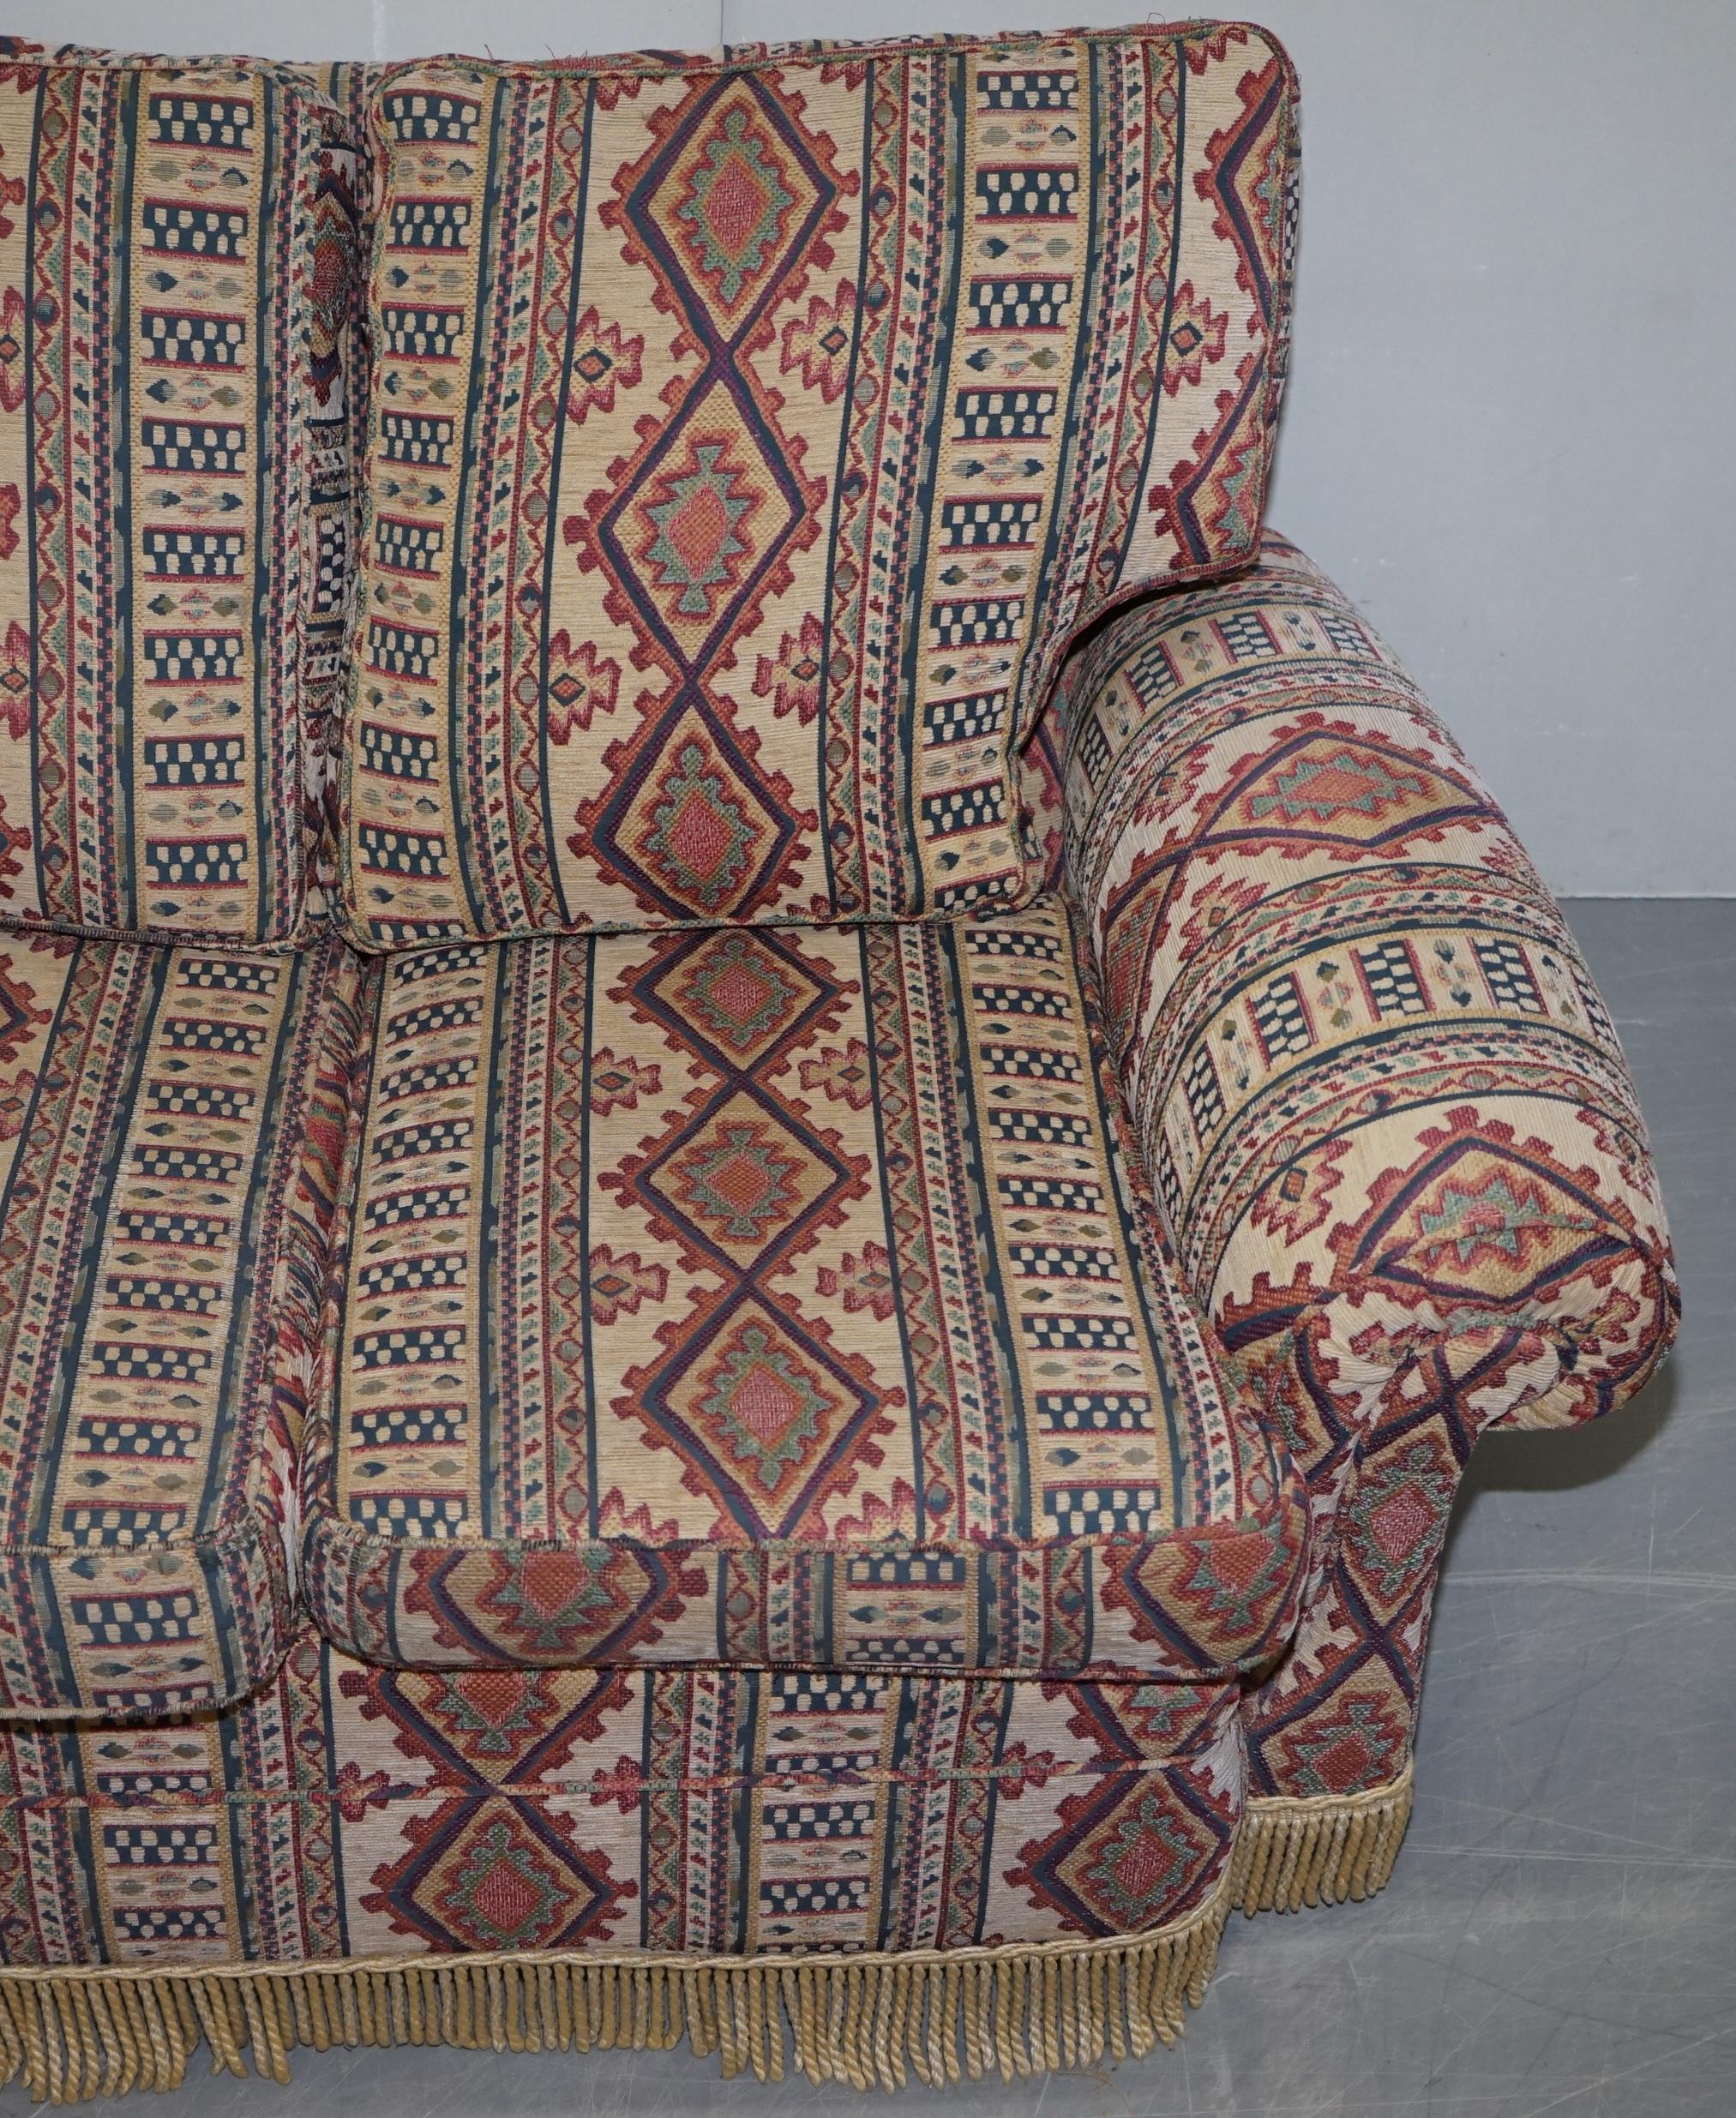 20th Century Midcentury Fully Sprung Art Deco Style Kilim Rug Upholstered Sofa Part of Suite For Sale